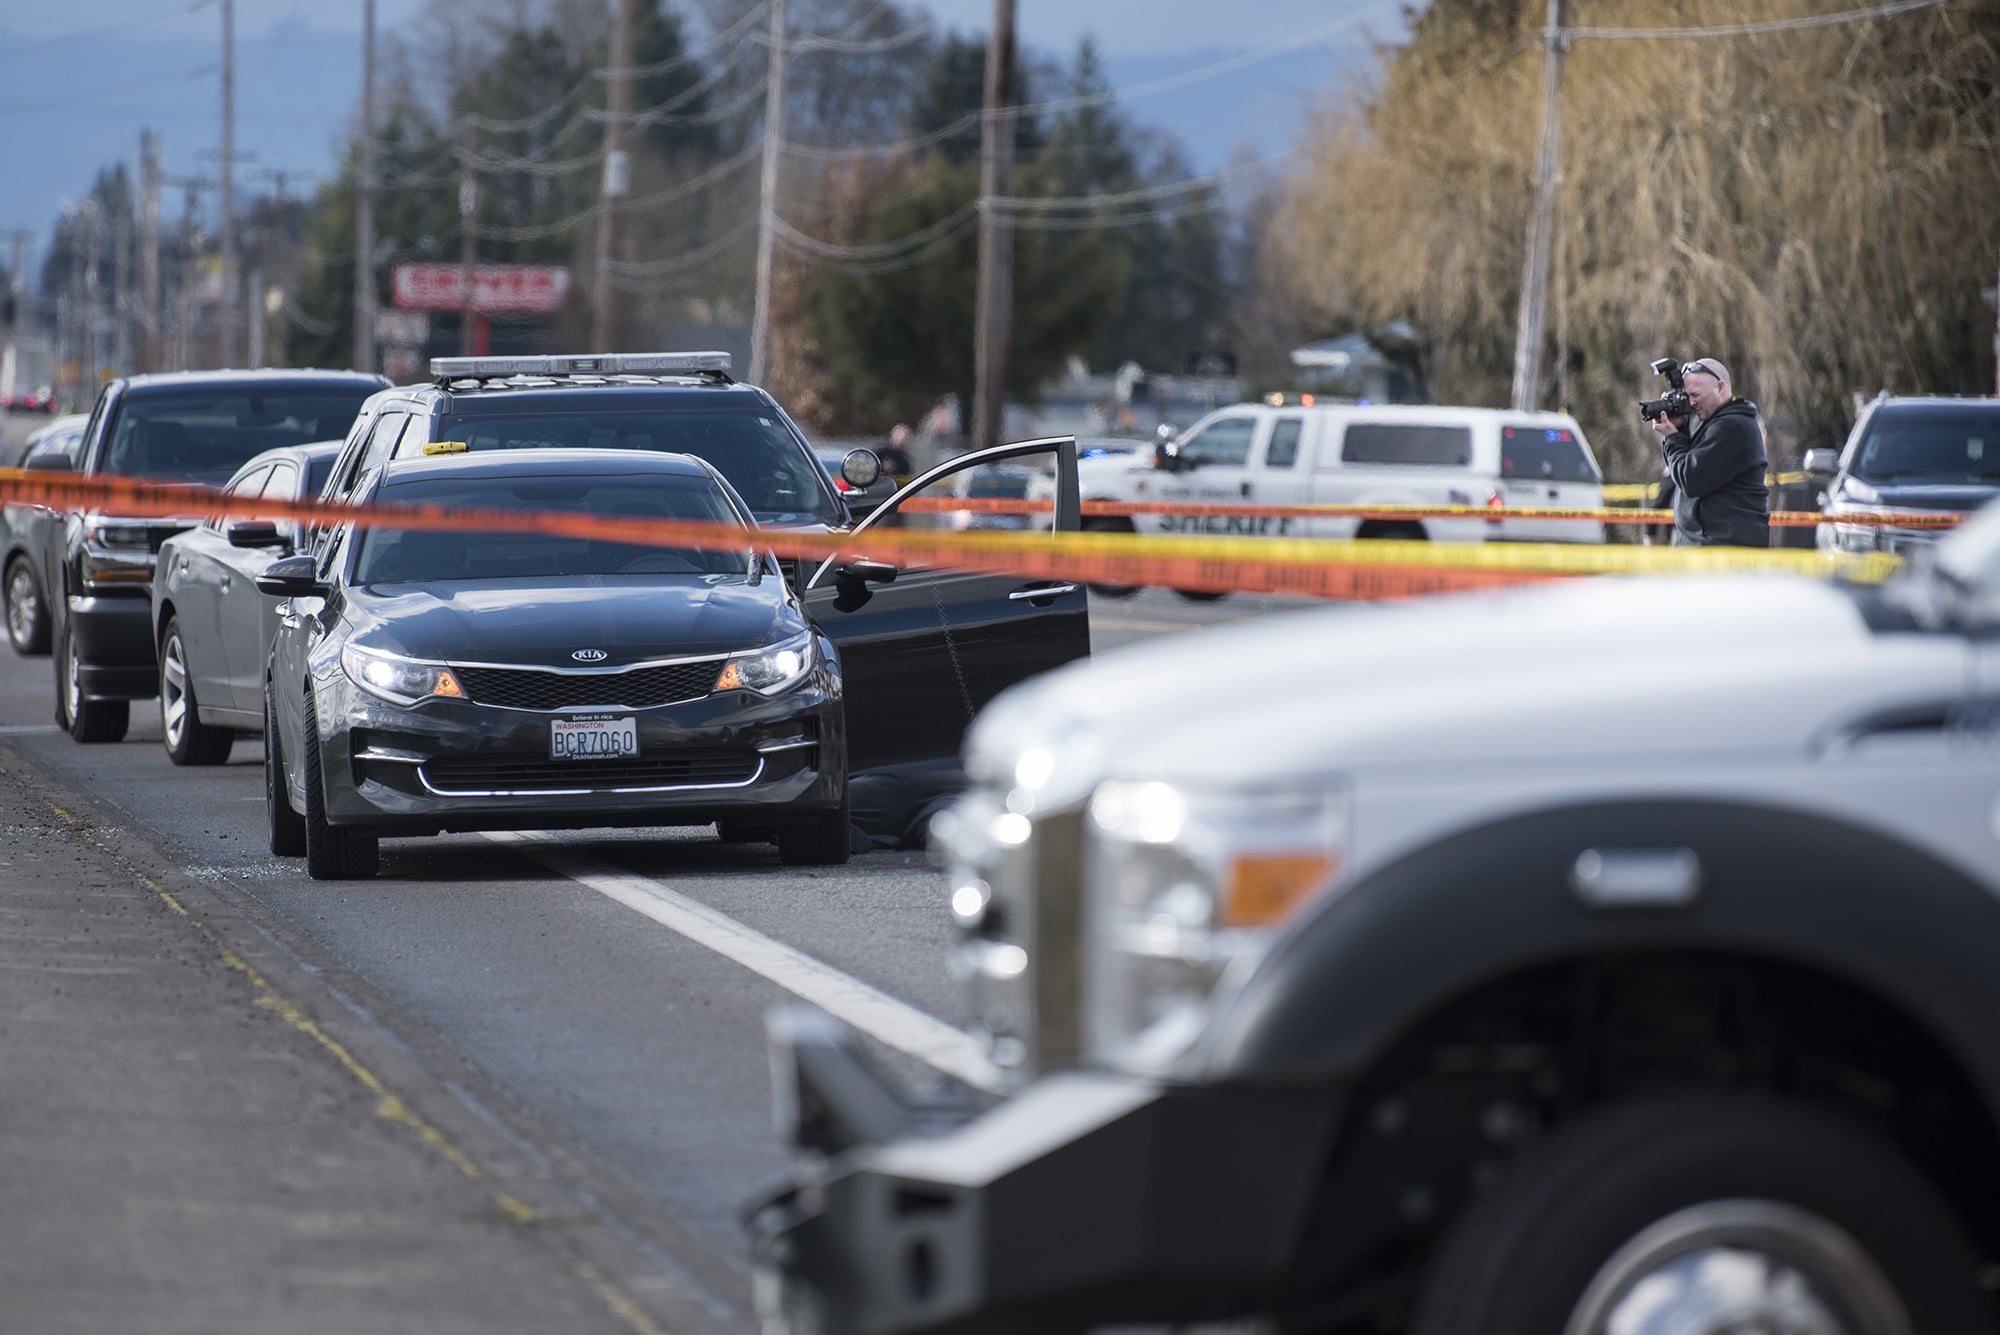 An investigator photographs the scene of a police shooting in Hazel Dell on Thursday, March 7, 2019.